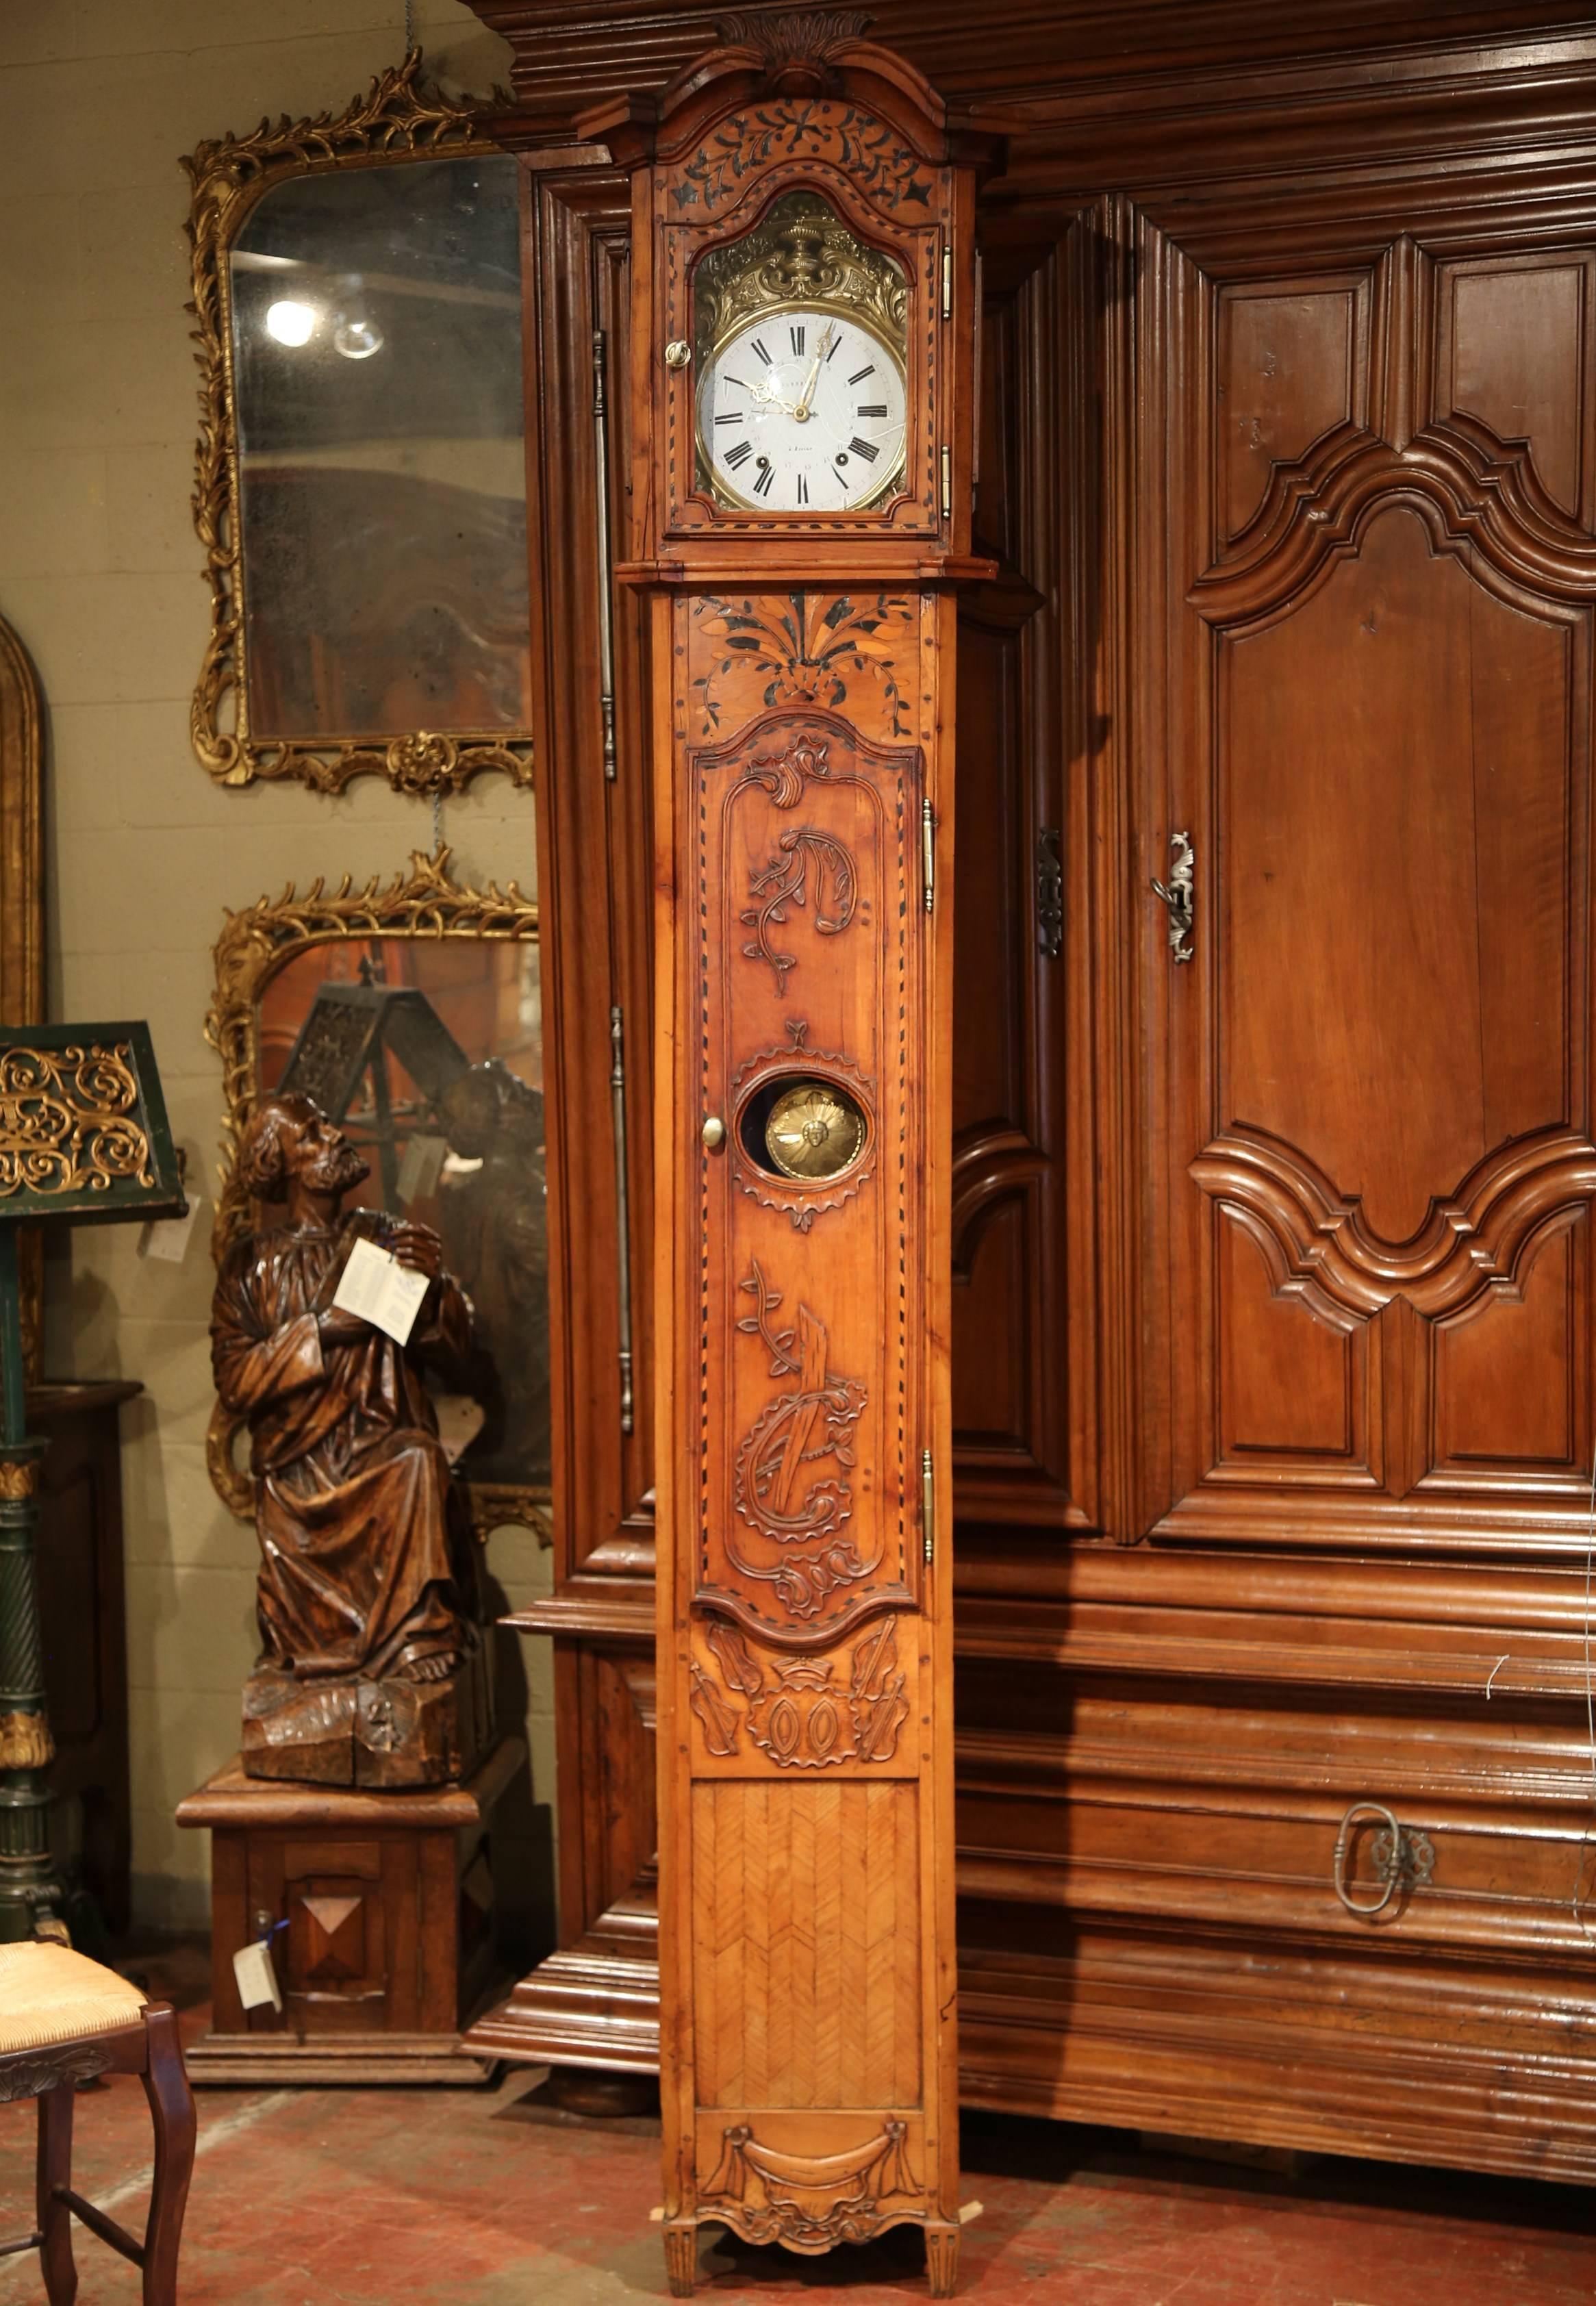 Make a grand statement in a living room or entryway with this elegant, antique morbier clock. Crafted in the Poitou region of France, circa 1780, the traditional tall grandfather clock has an arched top and beautifully carved motifs with inlay work